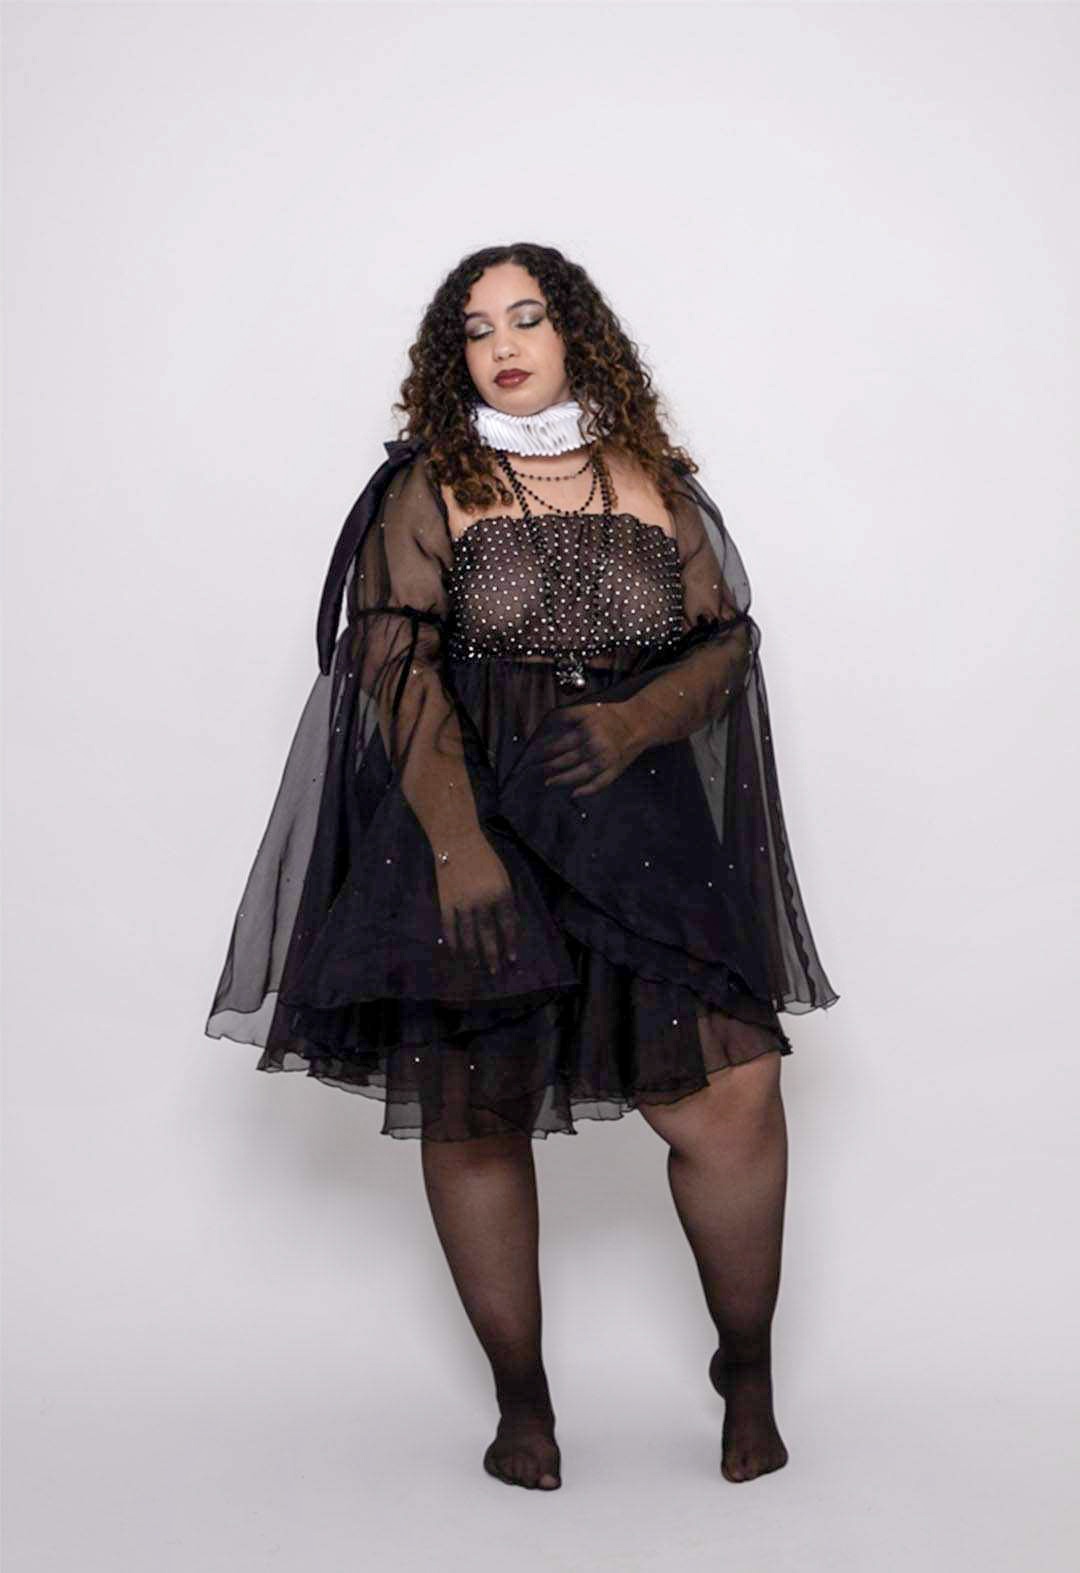 The model is wearing a black organza babydoll dress with rhinestone netting, over black mesh panty with chains, 